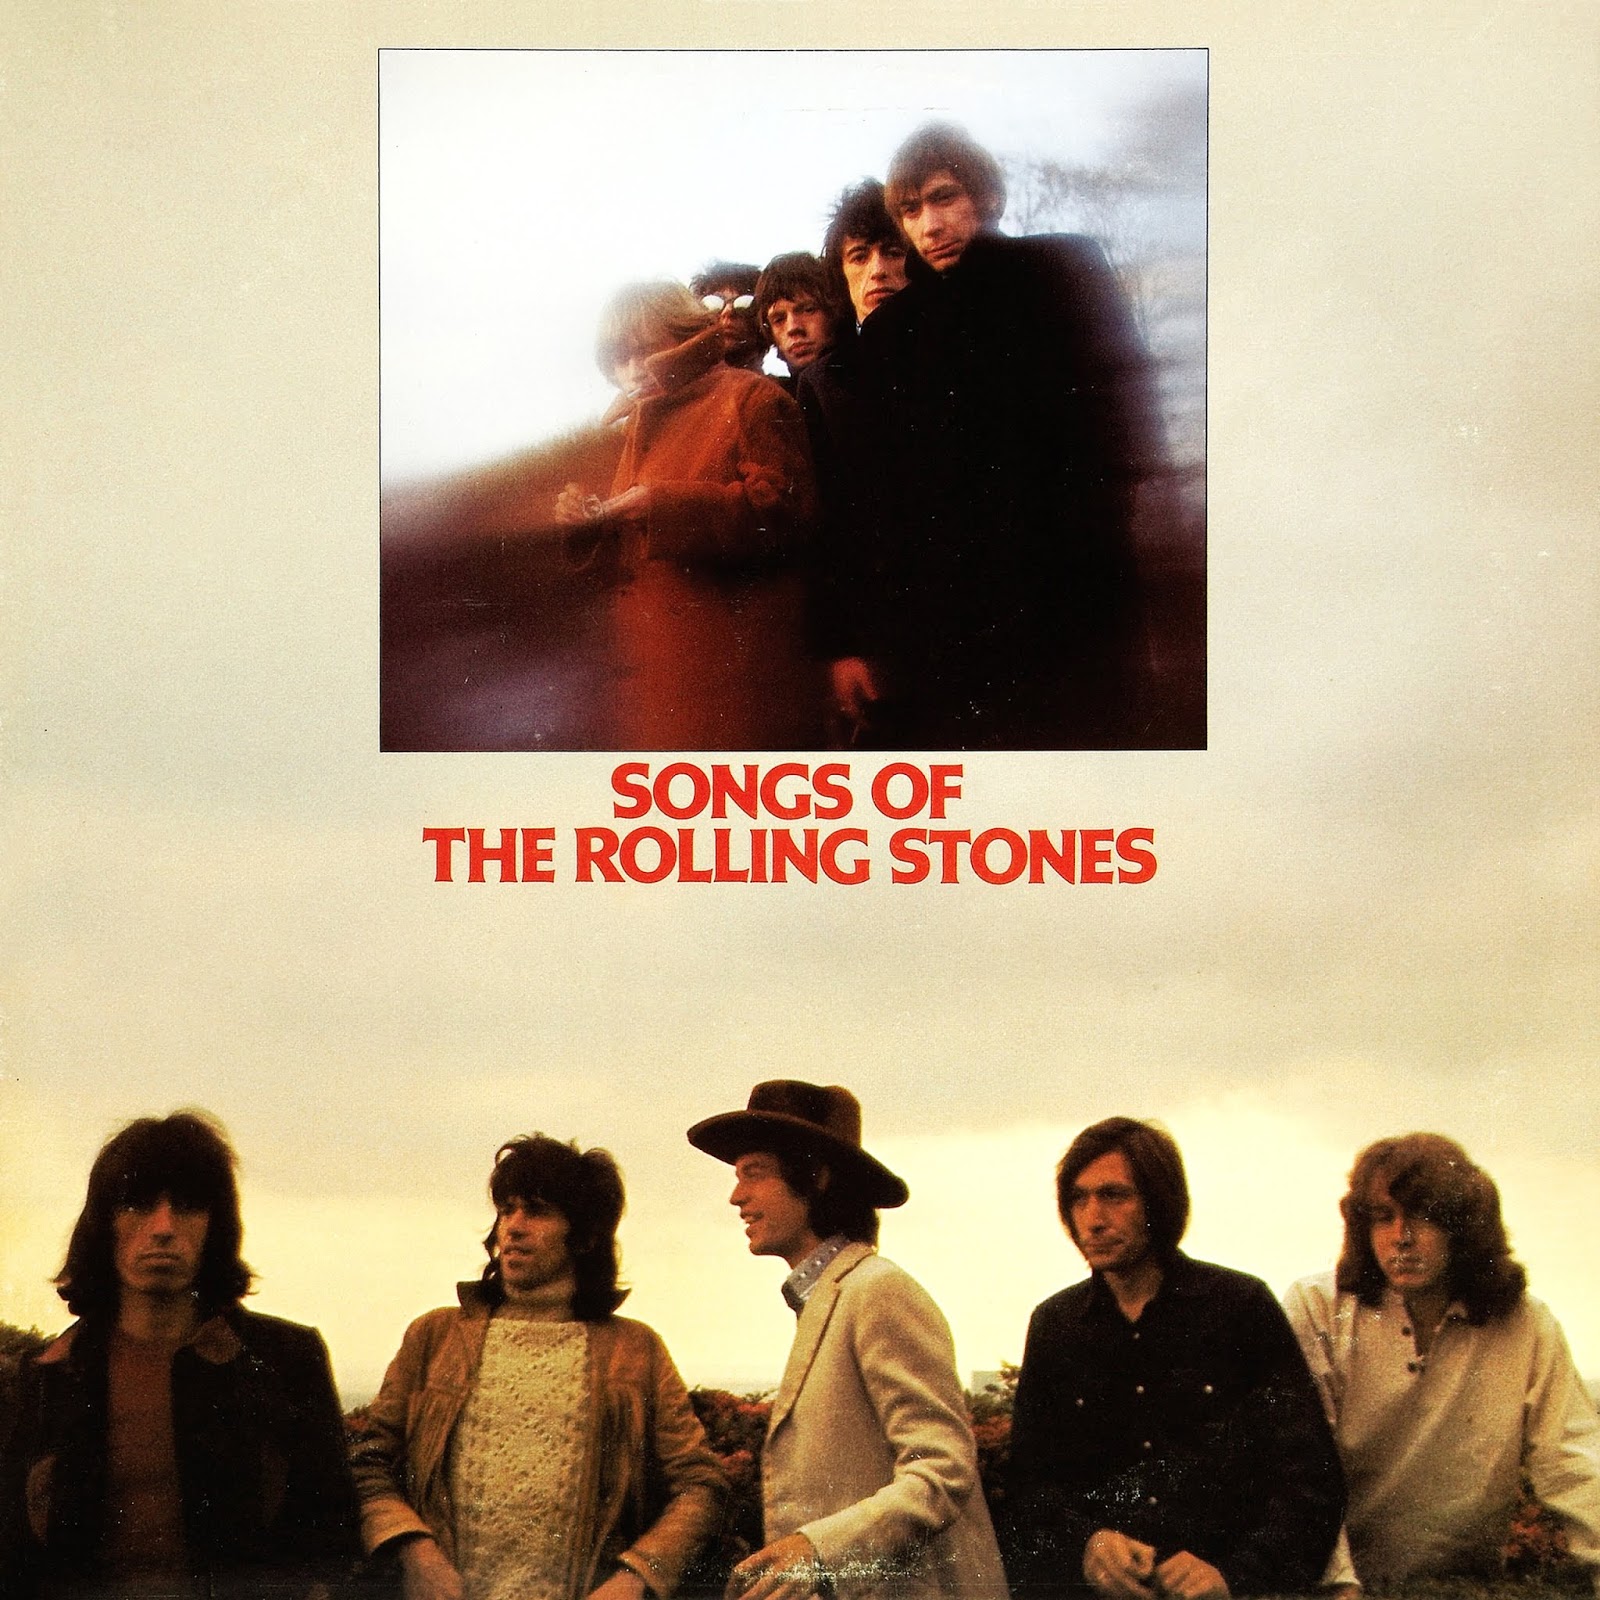 Rolling stones songs. Роллинг стоунз 1979. Песня Stone. Rolling Stones песня. Symphonic Music of the Rolling Stones.